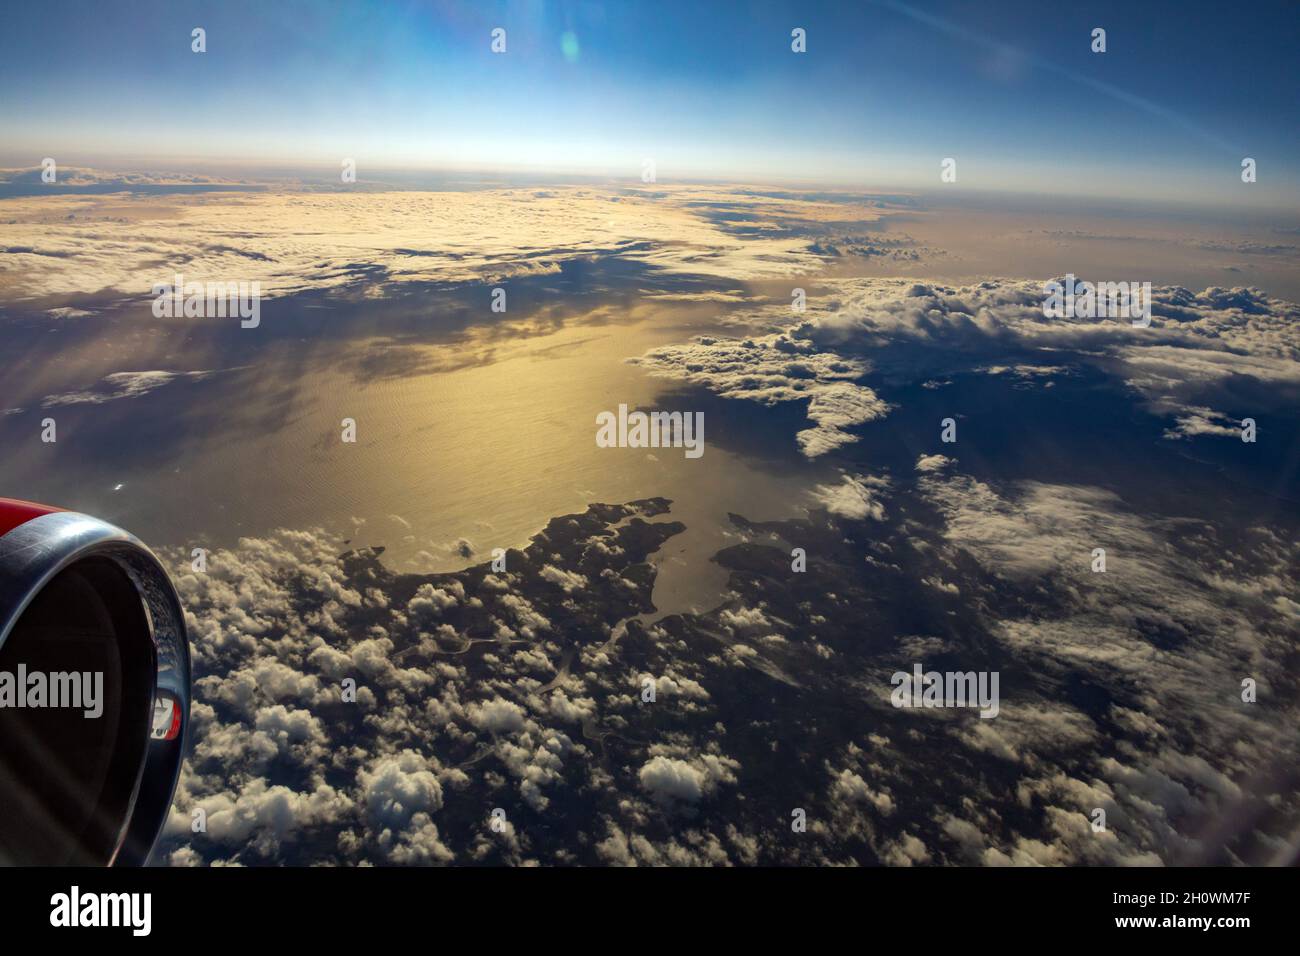 view from passenger plane at around 36,000feet / 11,000 metres above sea level Stock Photo